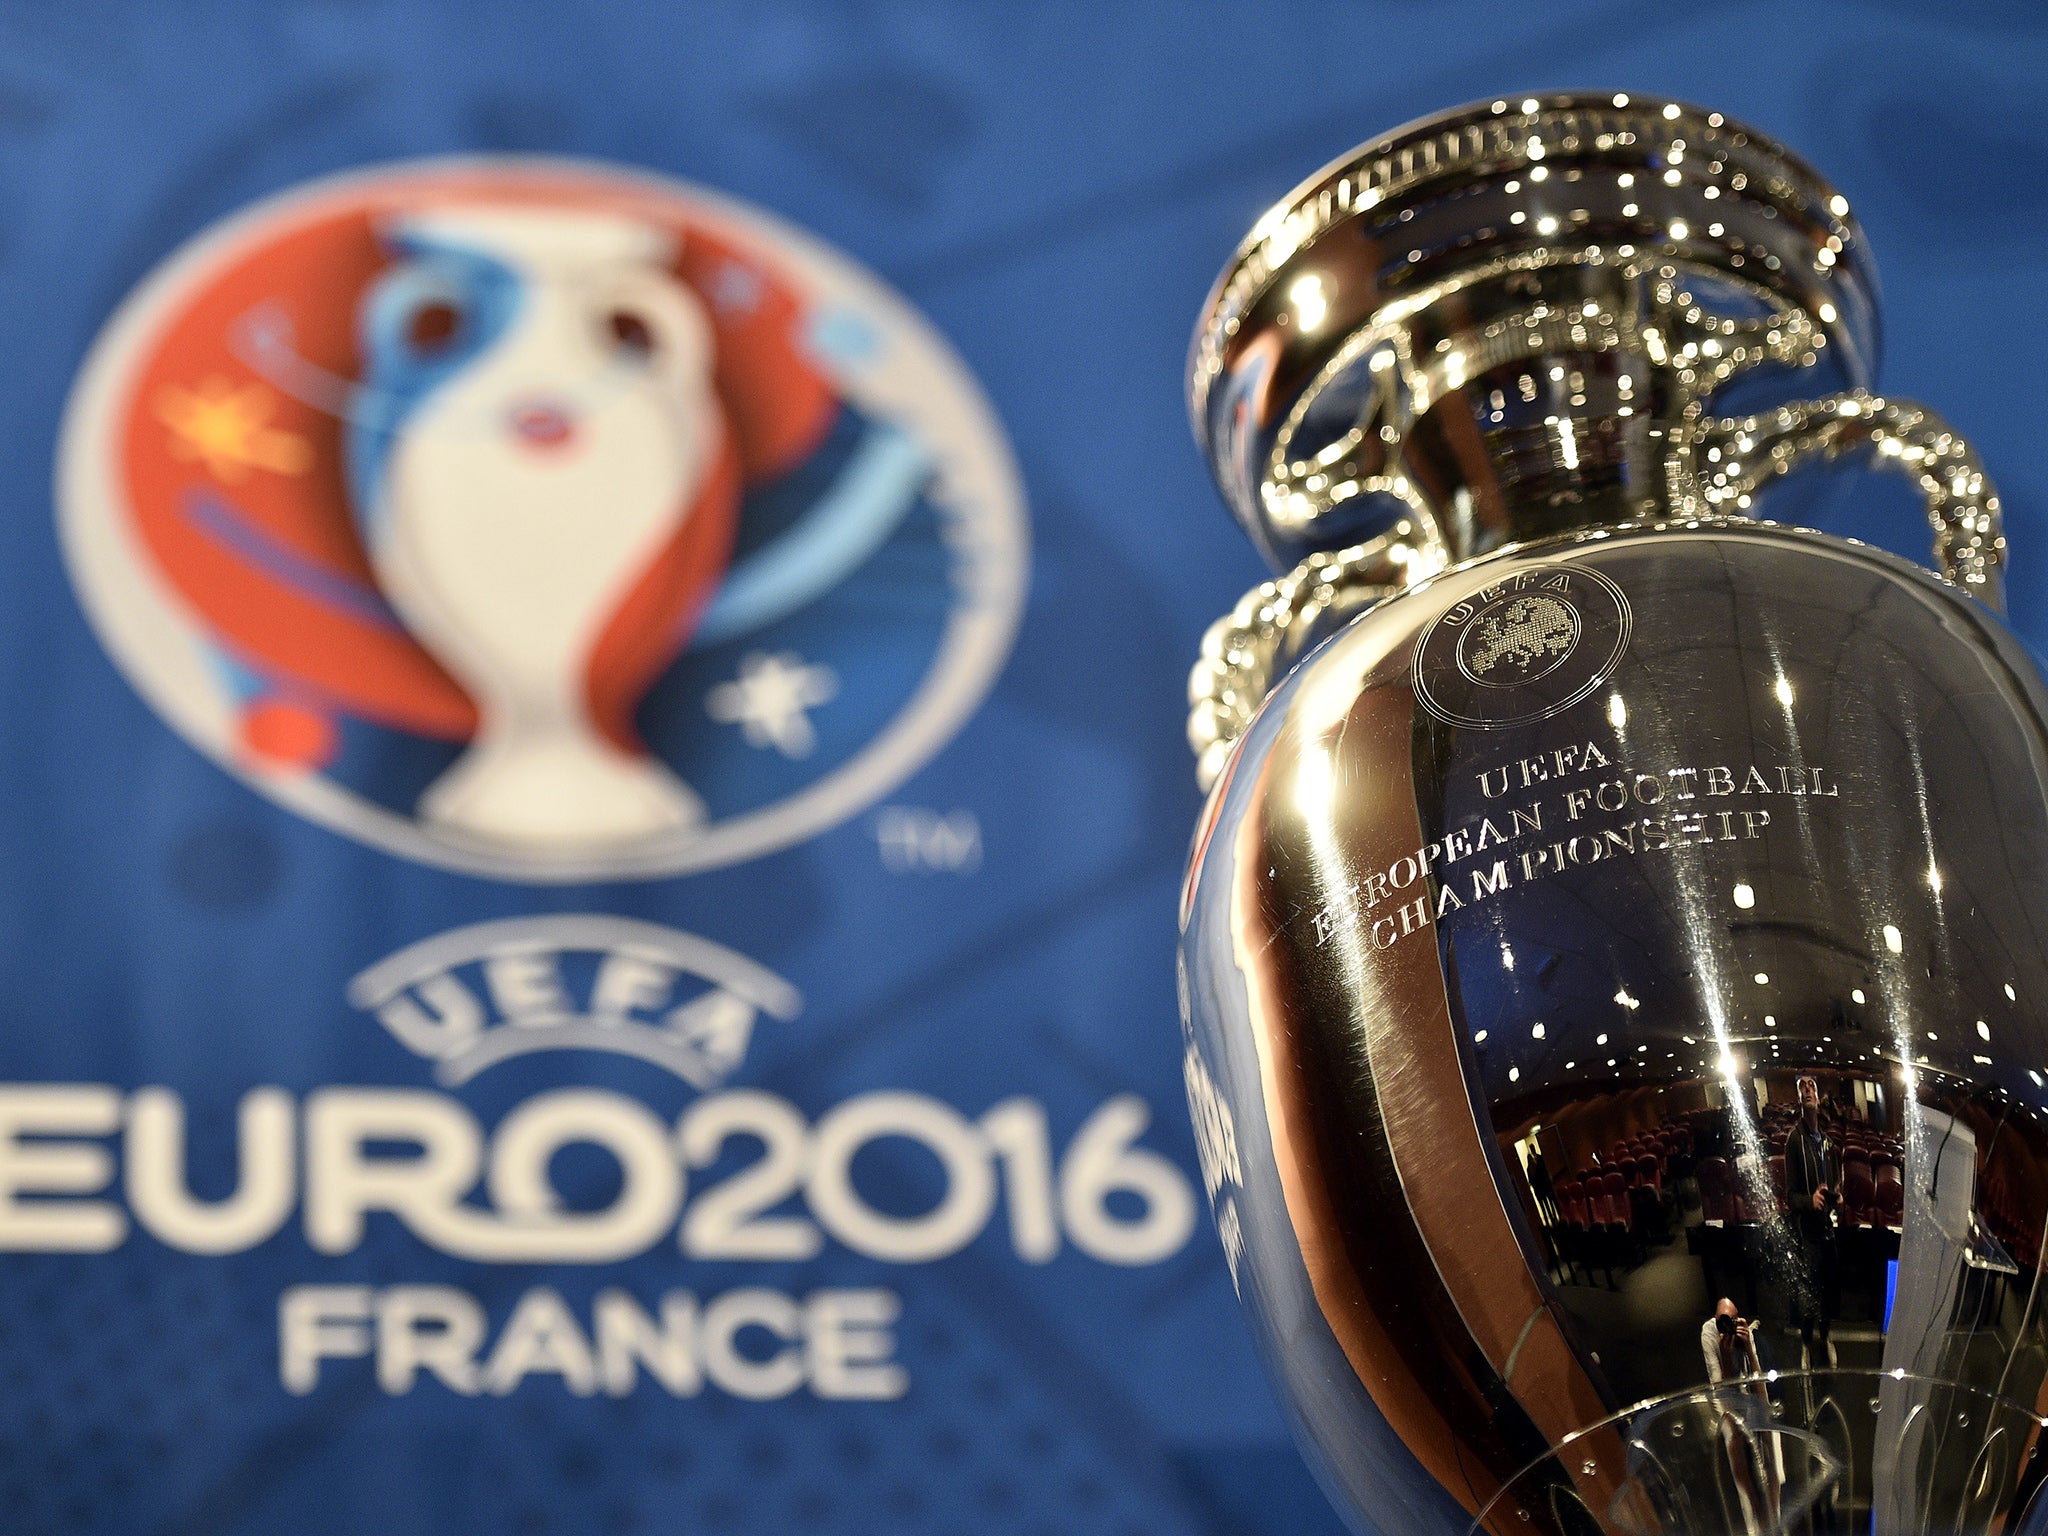 A view of the Euro 2016 trophy